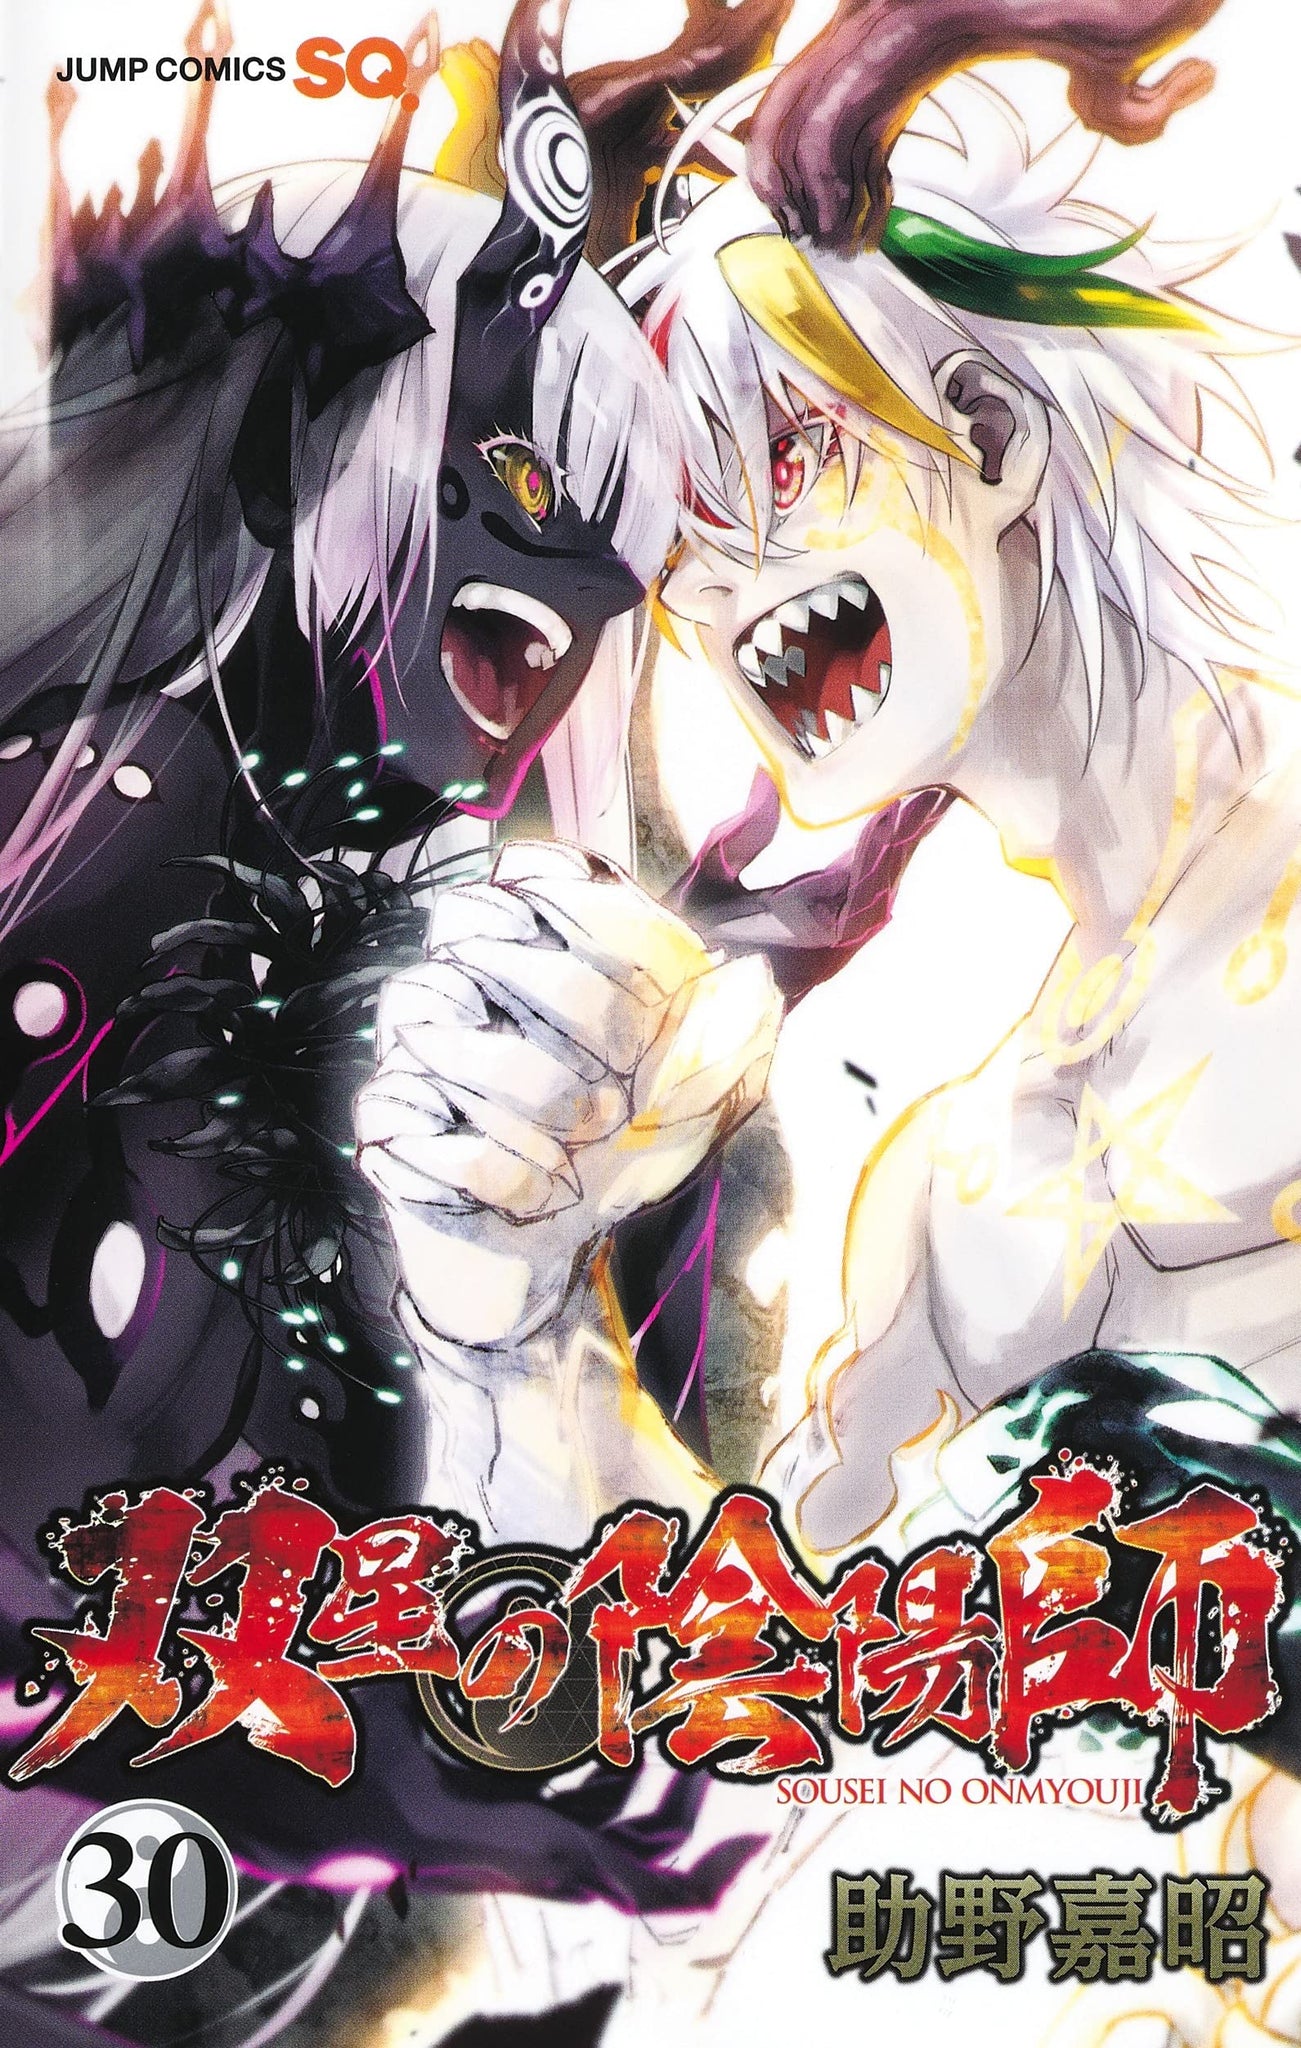 Twin Star Exorcists, Vol. 28, Book by Yoshiaki Sukeno, Official Publisher  Page